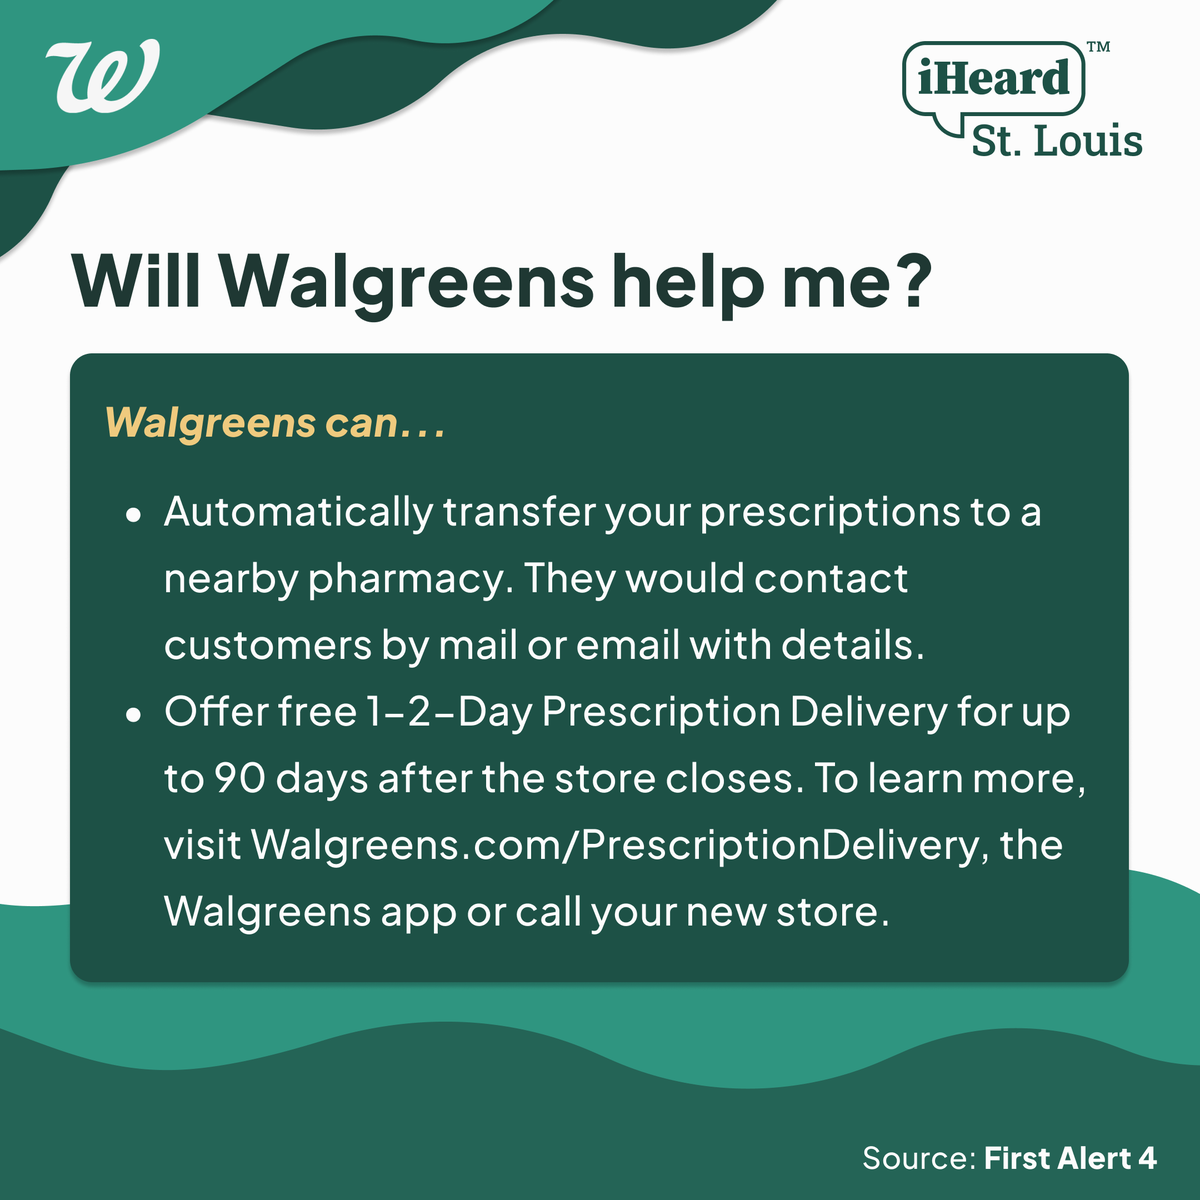 The Walgreens store in St. Louis’ Jeff-Vander-Lou neighborhood is set to close April 9th. Options for residents who need to move their prescriptions include Greater Health Pharmacy at Delmar DivINe, Walgreens (4171 Lindell), and CVS (3925 Lindell). #iHeardSTL #Pharmacy